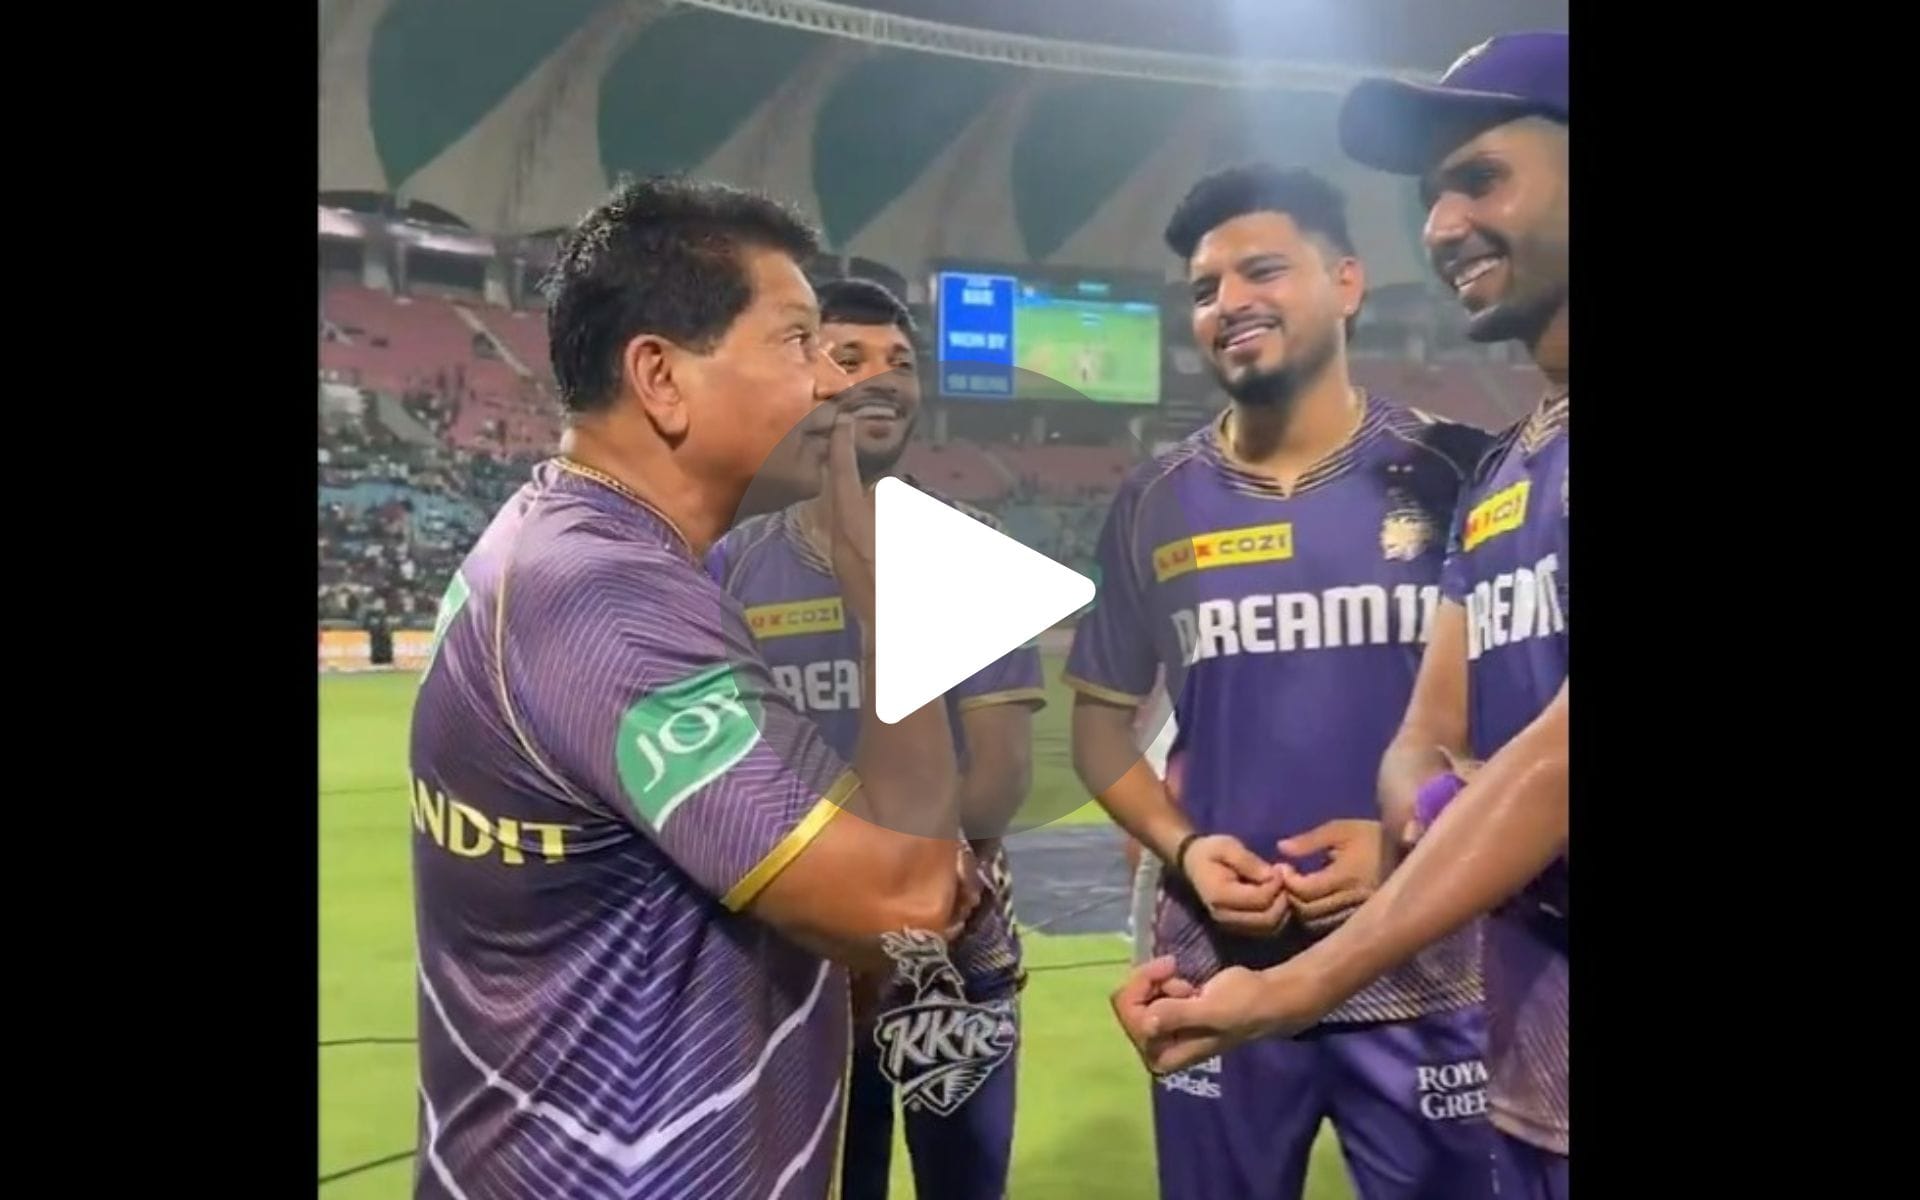 [Watch] 'Finger On Your Lips' - KKR's Coach Chandrakant Pandit Teases Harshit Rana